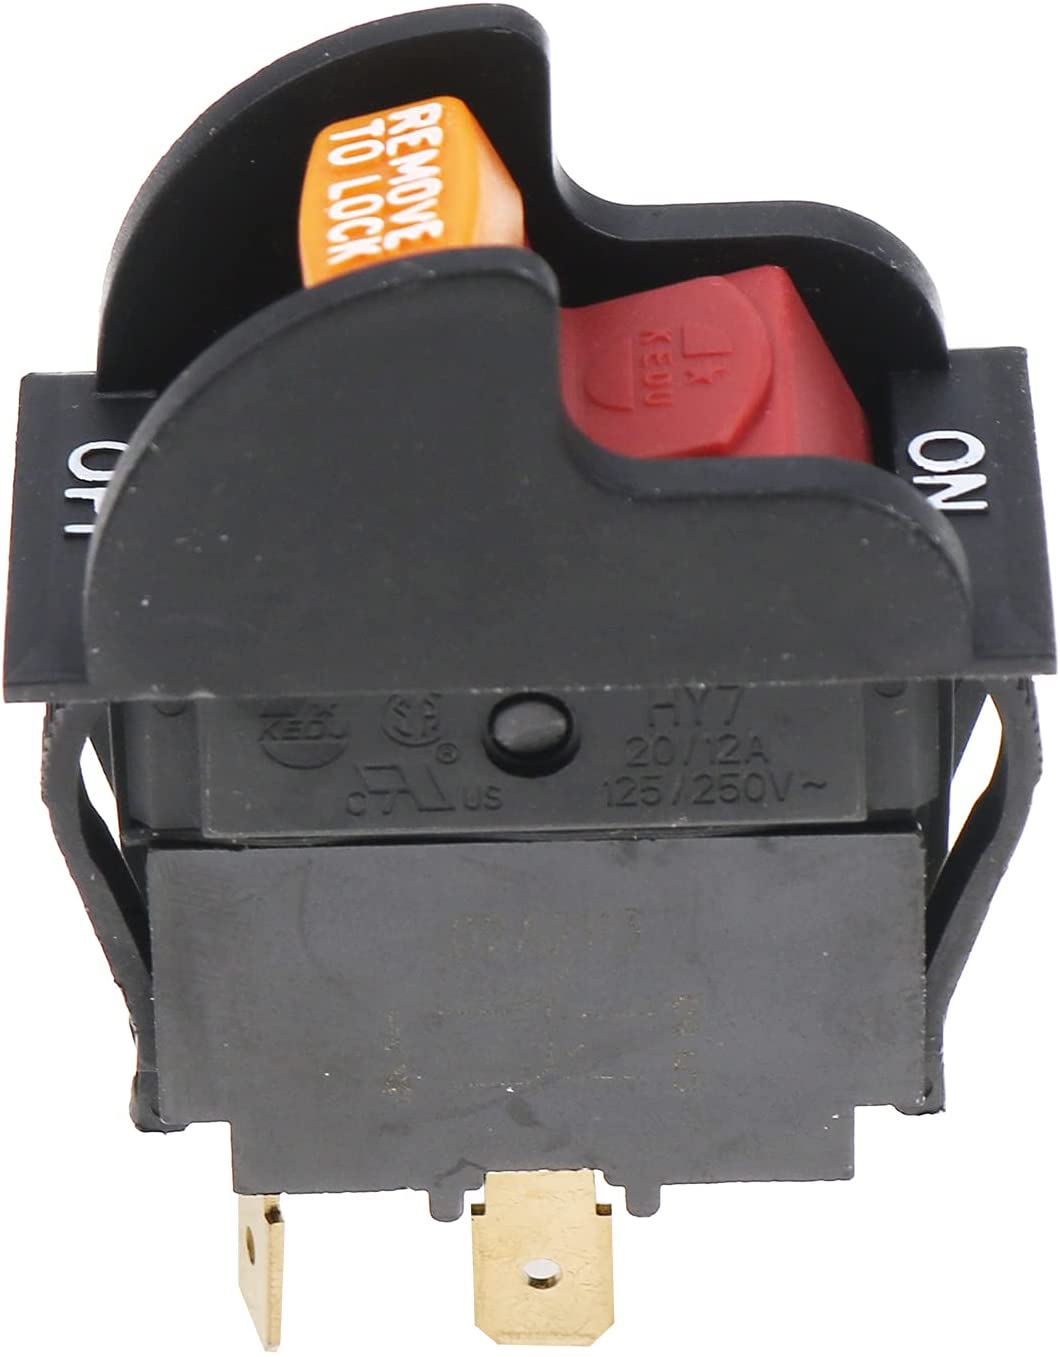 On-Off Toggle Switch SW7A 489105-00 for Delta 11-900 11-950 11-980 11-985 11-990 14-040 17-900 DP400 DP300L 17-950L Drill Press 34-670 36-600 36-977 36-978 36-980 36-981 TS200LS Table Saw - KUDUPARTS